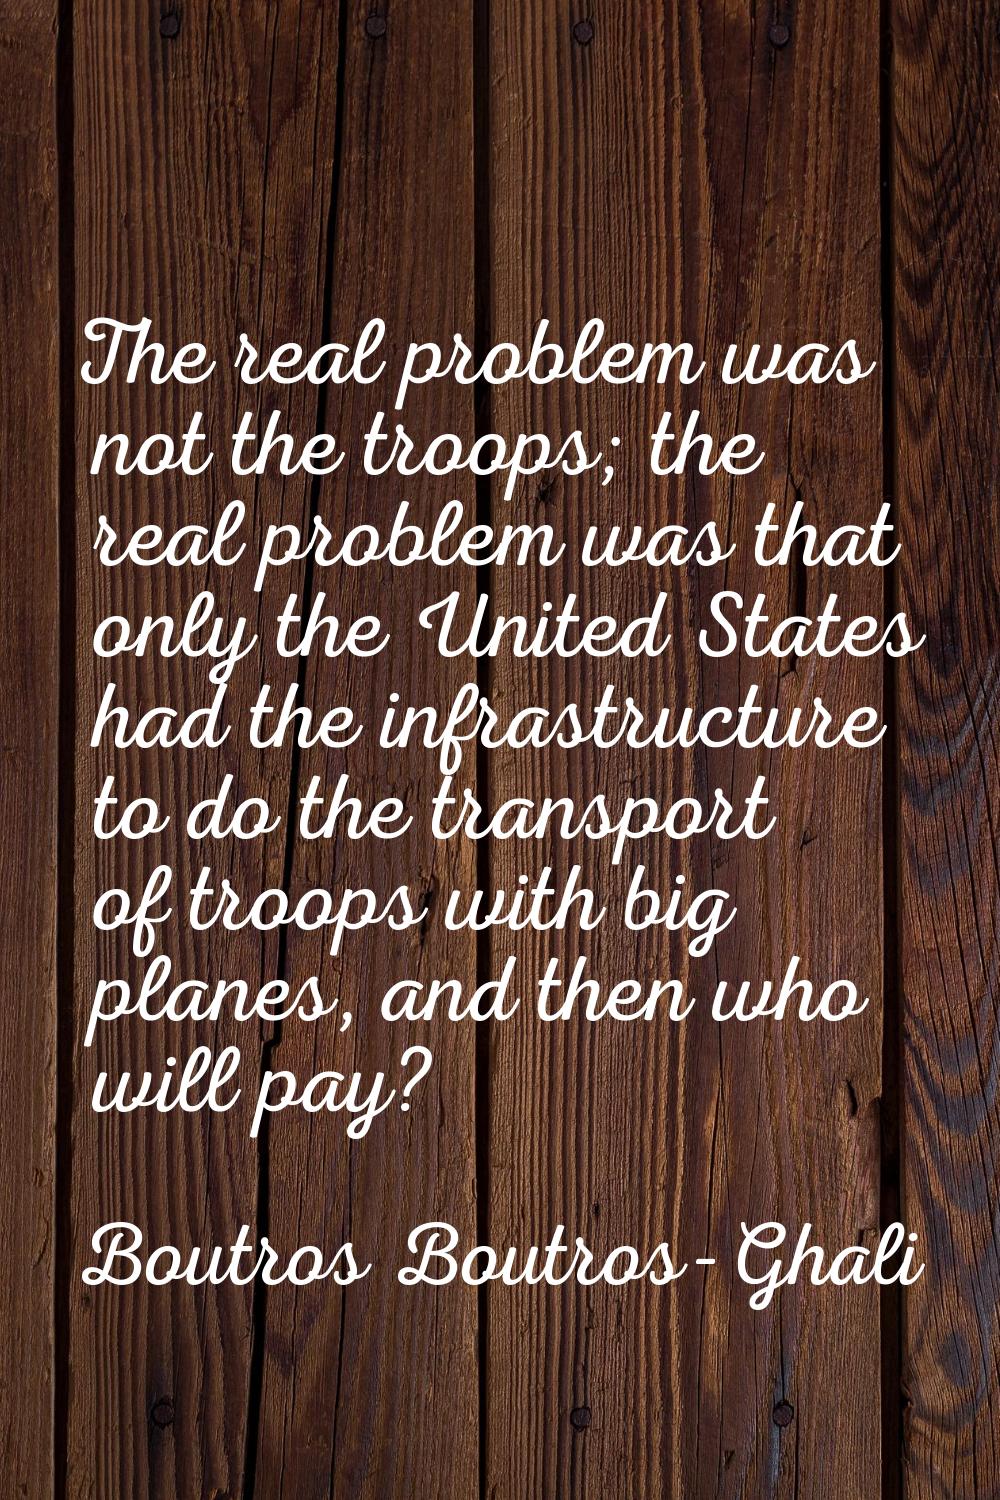 The real problem was not the troops; the real problem was that only the United States had the infra